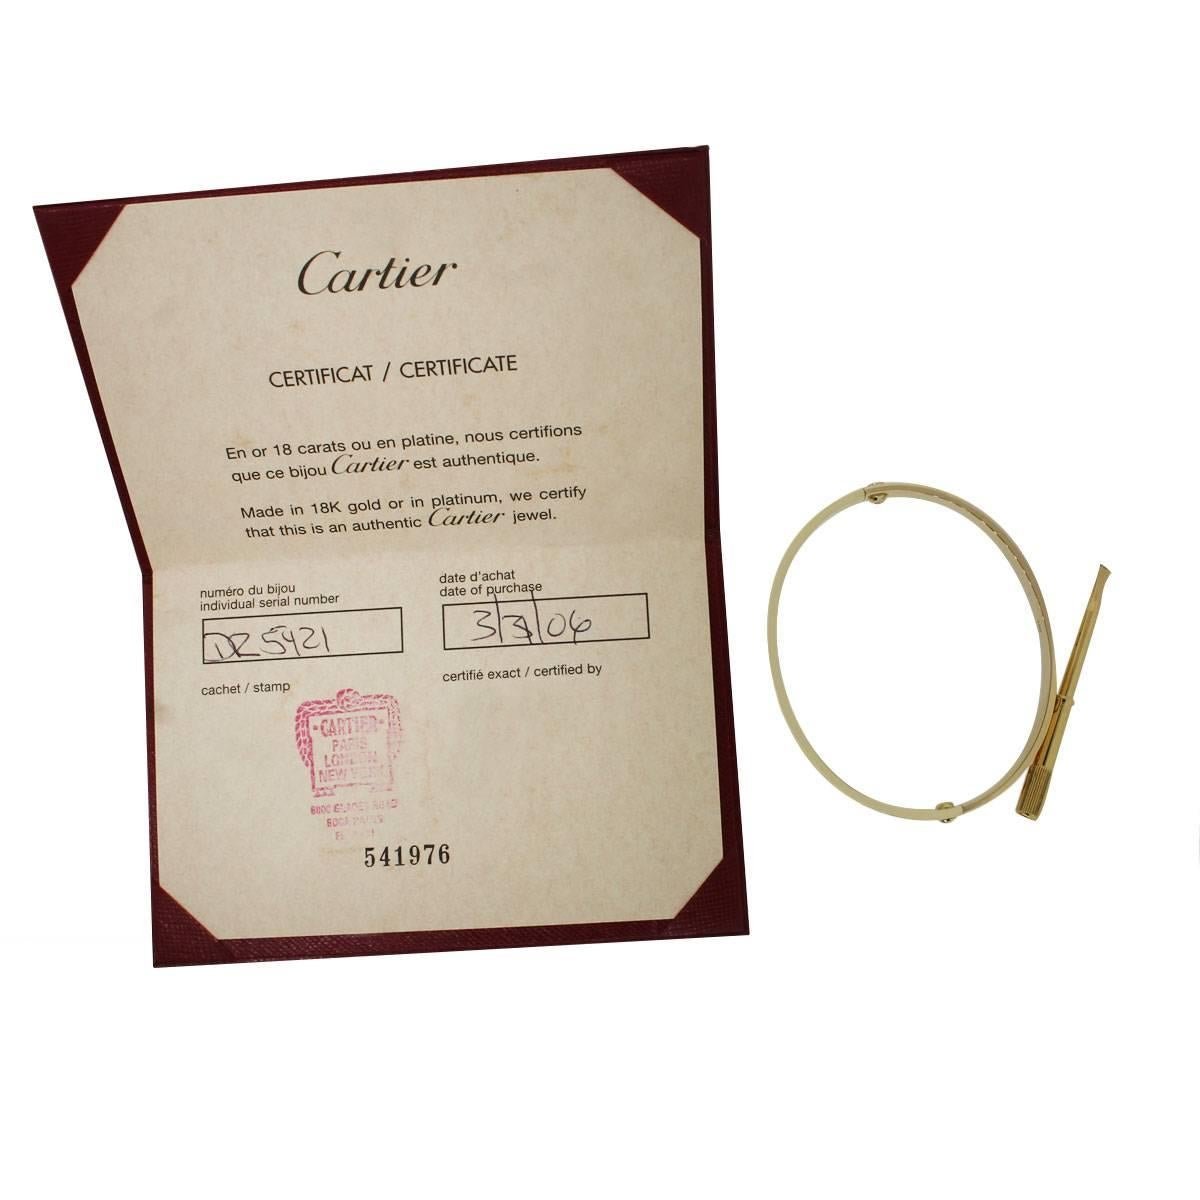 Brand: Cartier
Material: 18k yellow gold
Size: Cartier size 20 (7.5″)
Clasp: Screw on/off
Measurements: 2.40″ x 0.25″ x 2.90″
Total Weight: 37.5g (24.1dwt)
Additional Details: This item comes with a presentation box and original Cartier bangle